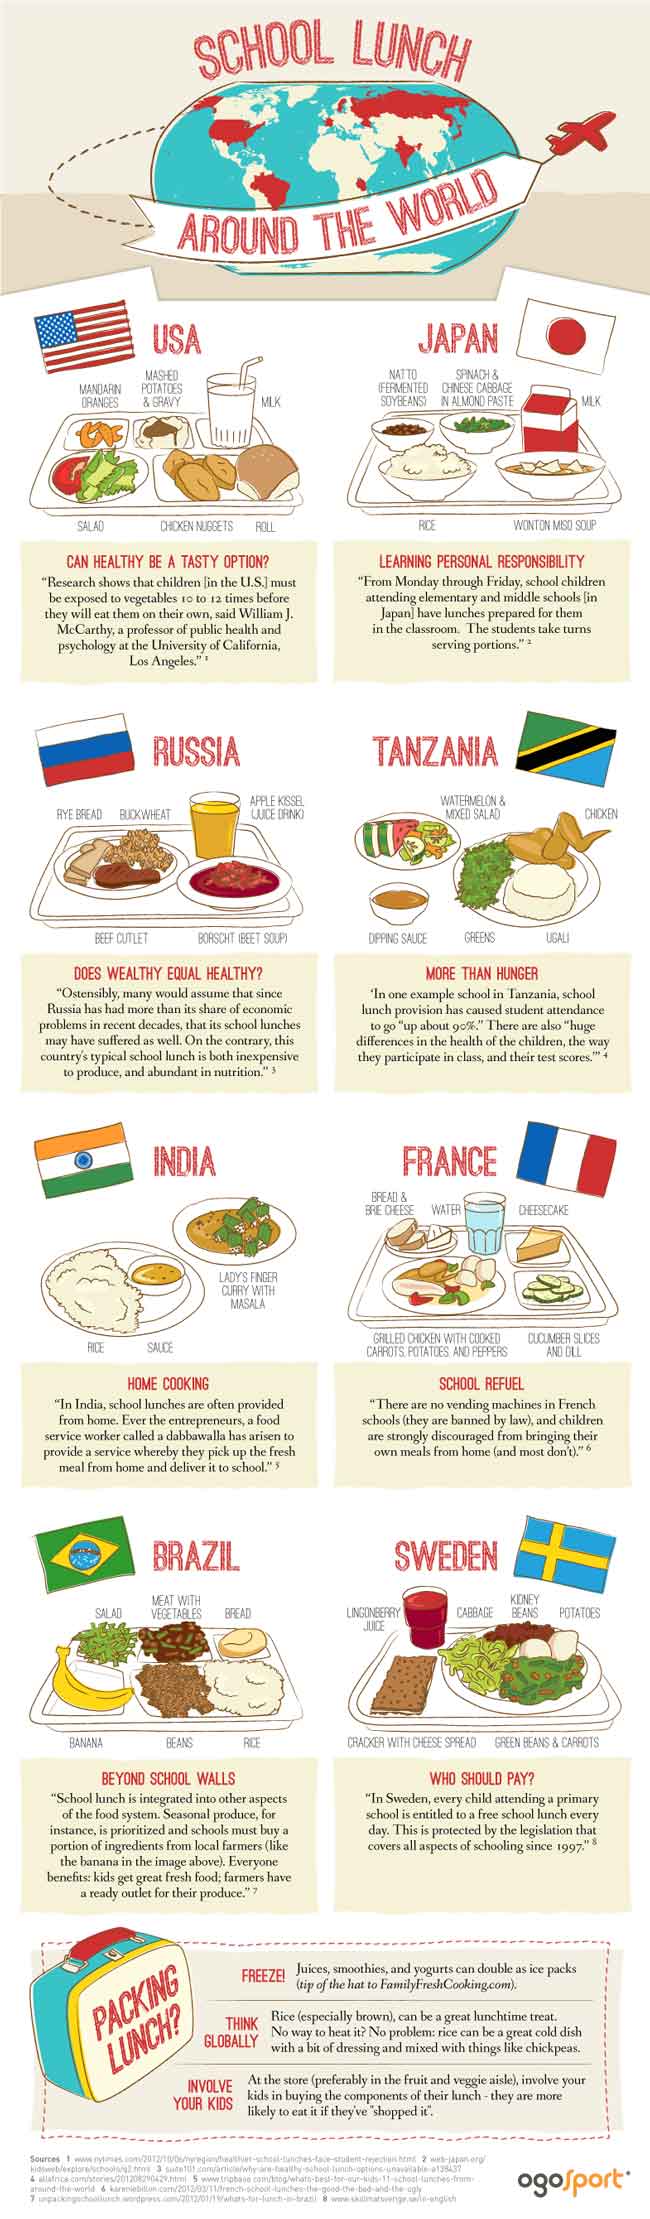 school lunches from around the world